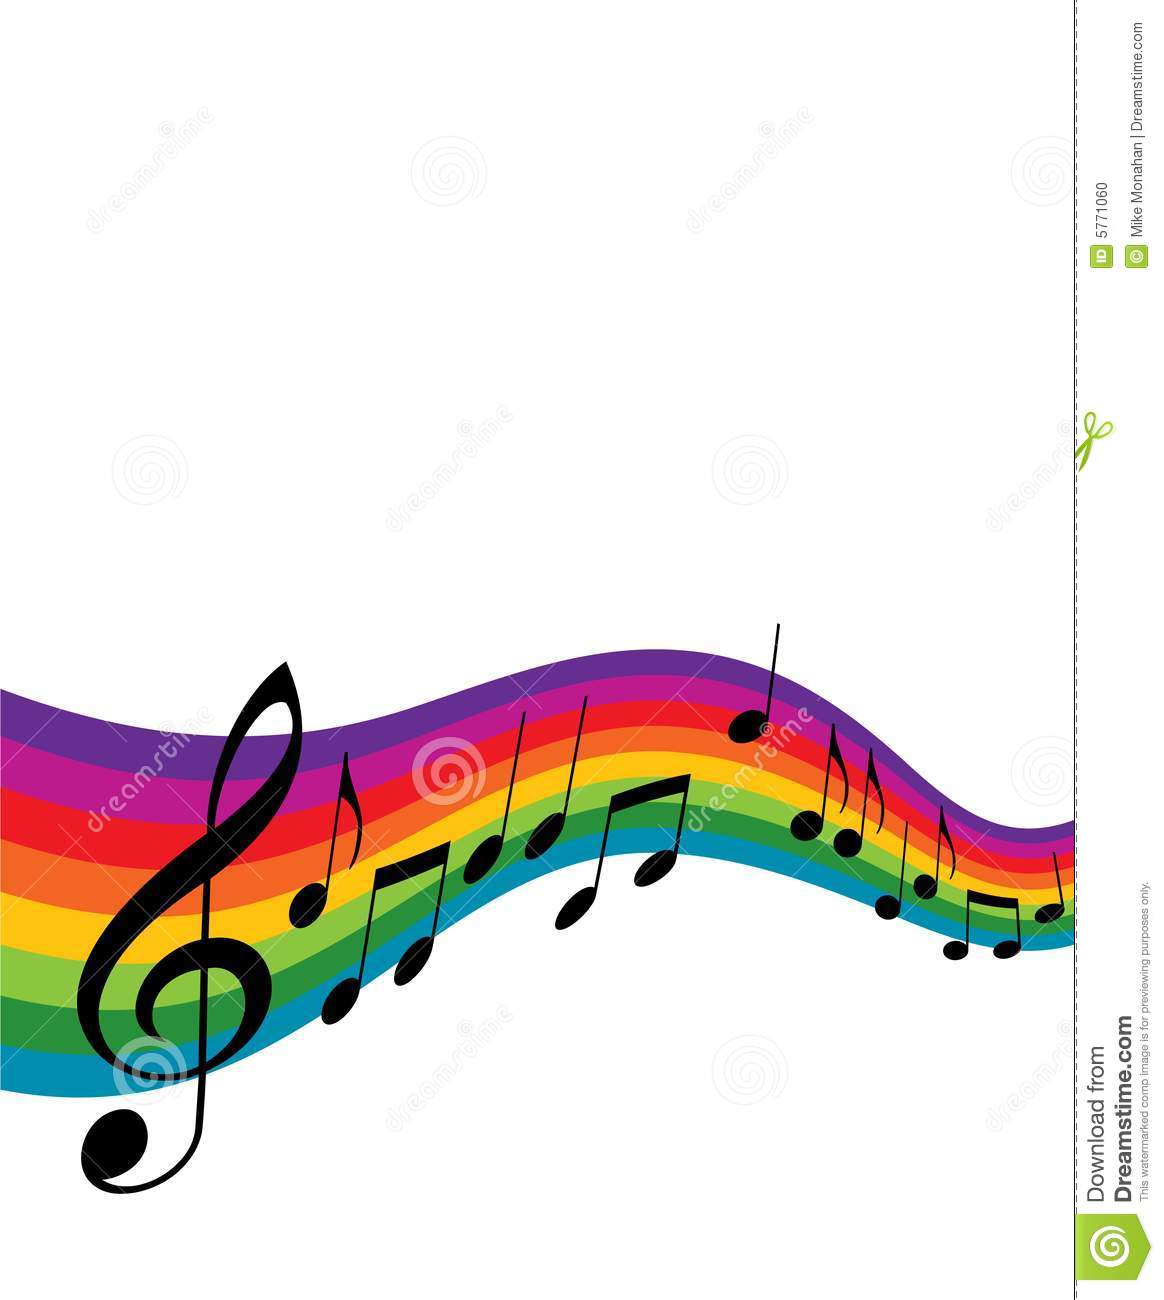 Colorful Music Staff Clipart Musical Background Design 5771060 Jpg